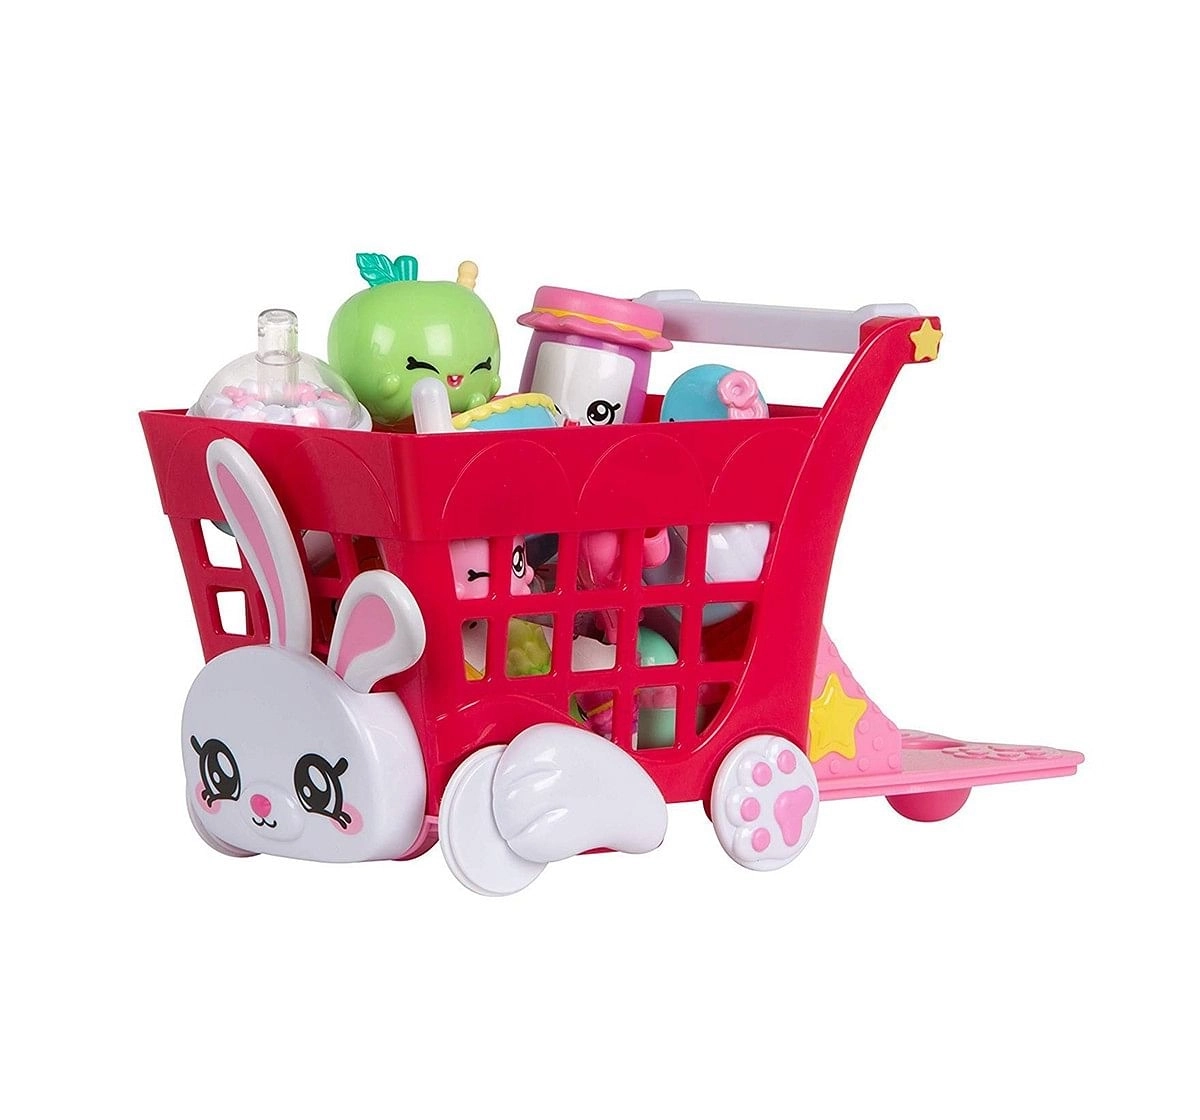  Kindi Kids S1 Fun Shopping Cart Dolls & Accessories for Kids age 3Y+ 